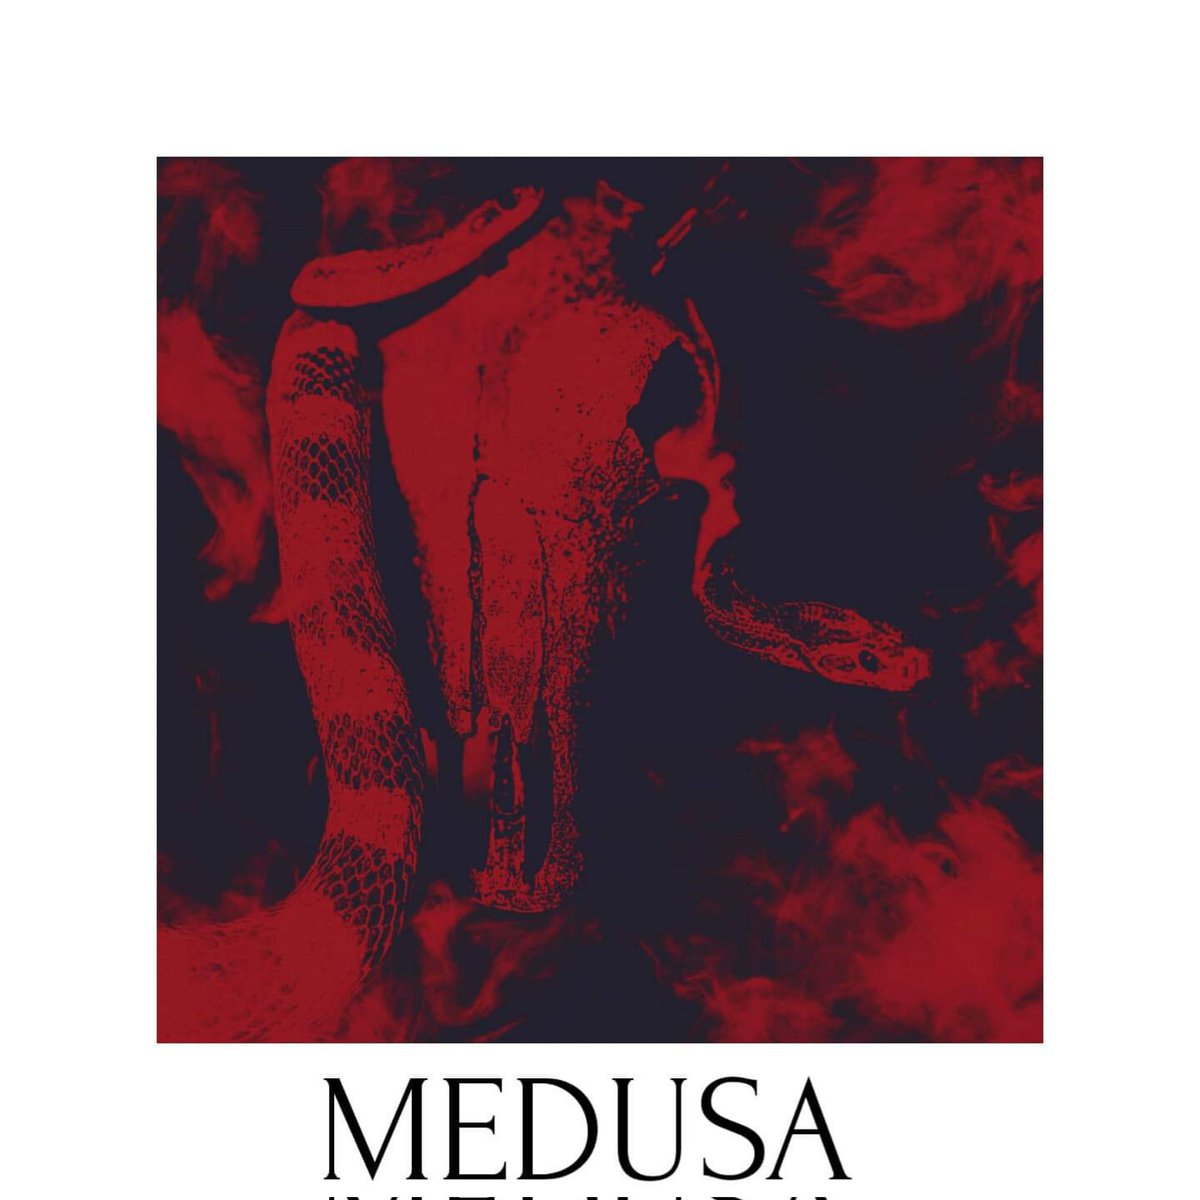 The music video for our upcoming single Medusa premieres tonight at 7PM, the team behind this have worked so hard on this one and honestly we cannot wait to show you the result! Use the linktree in our bio to go to the video premiere!